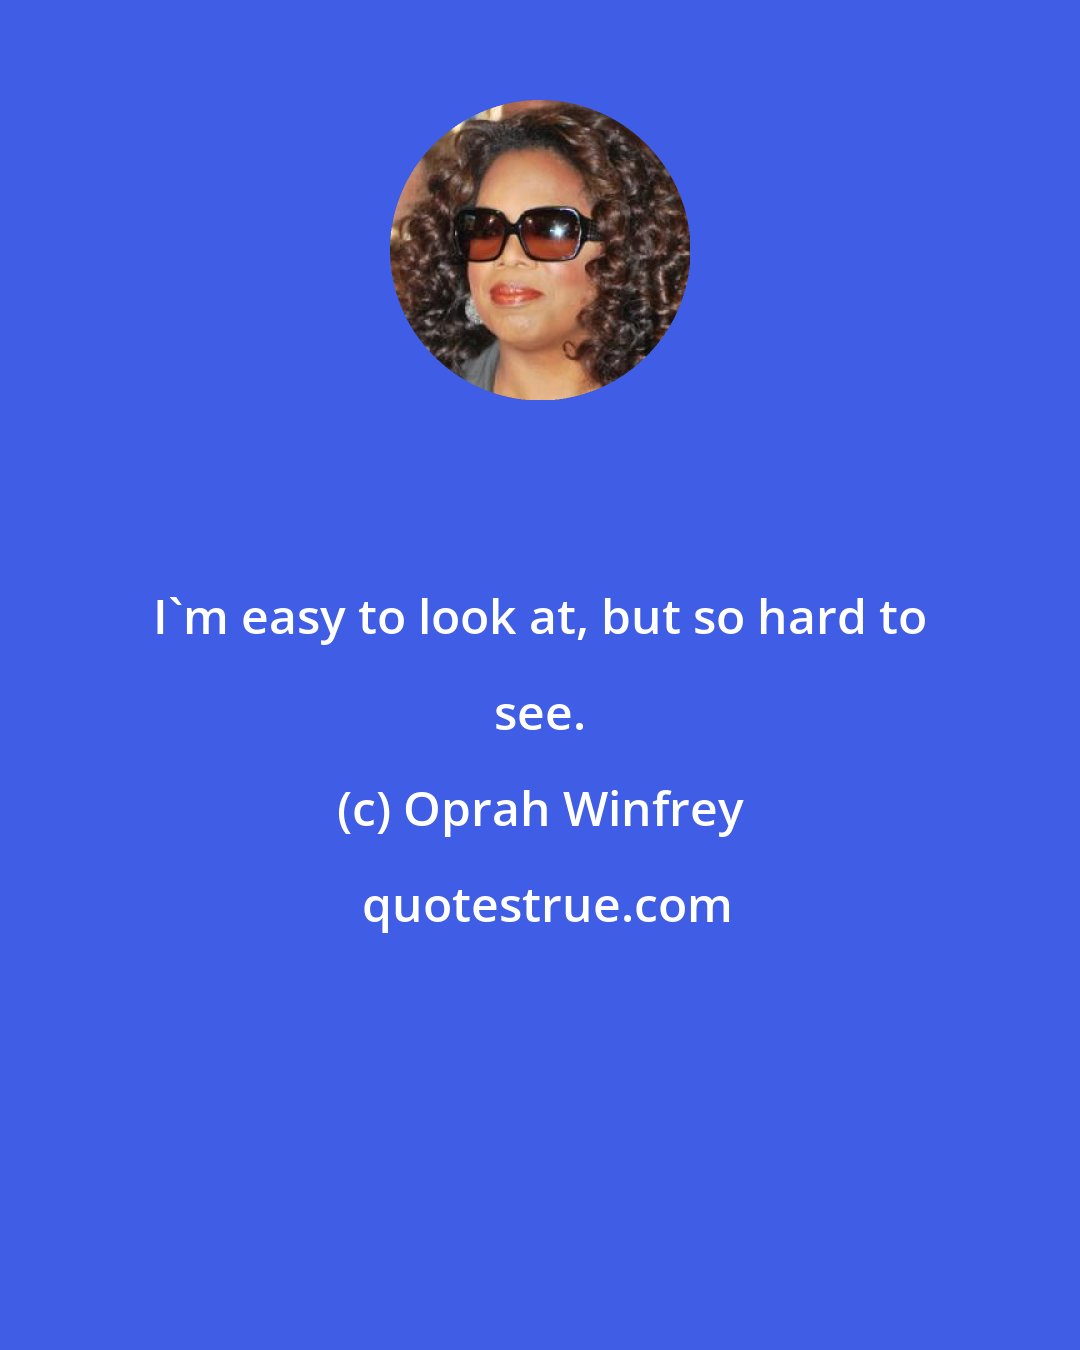 Oprah Winfrey: I'm easy to look at, but so hard to see.